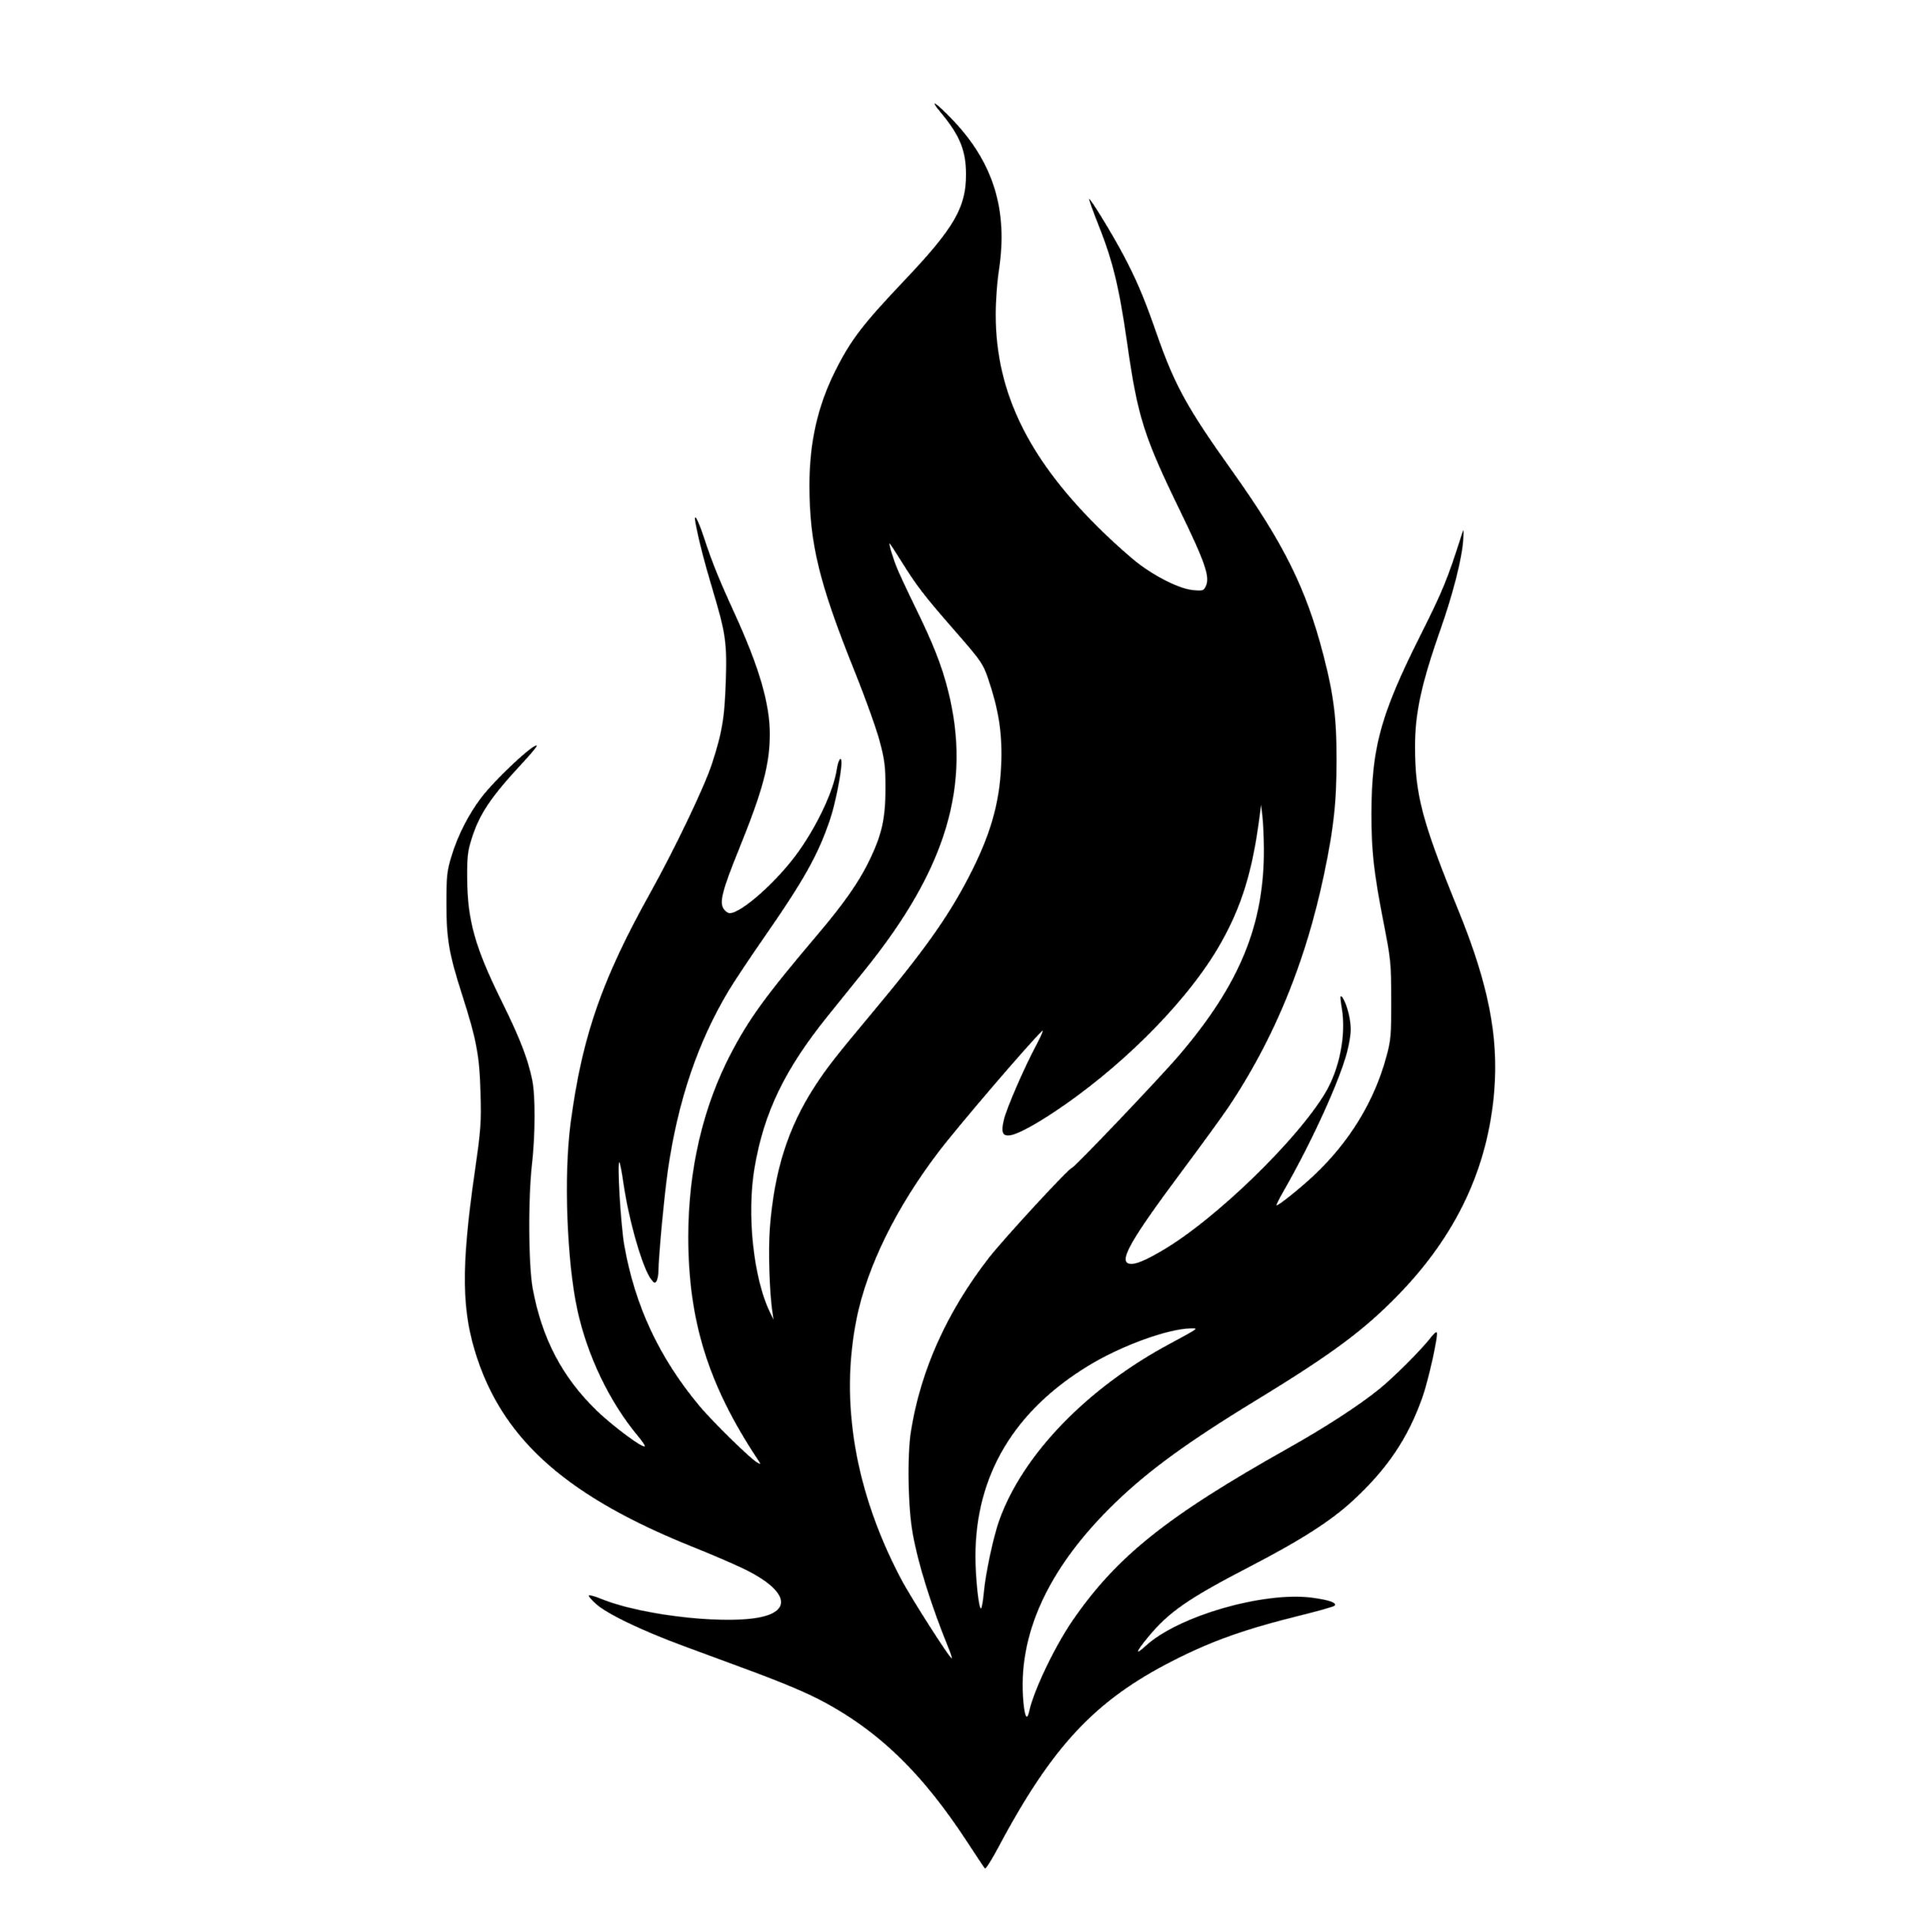 FireShapes: SVG Instant Download for Cricut, Silhouette, Laser Machines